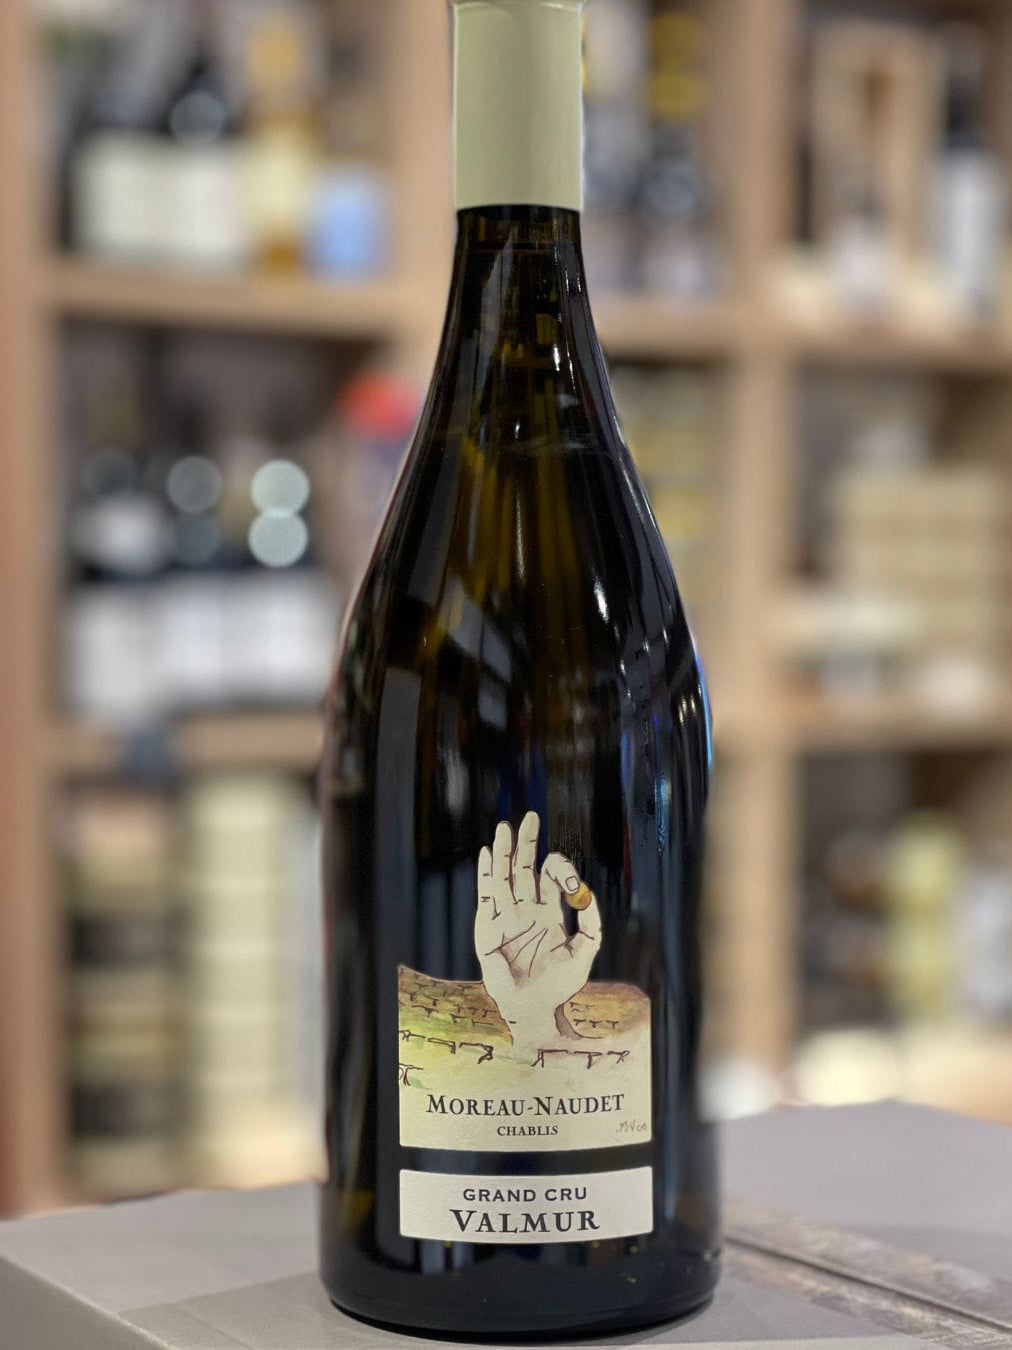 Shop Domaine Moreau-Naudet Domaine Moreau-Naudet Chablis Grand Cru Valmur 2018 online at PENTICTON artisanal French wine store in Hong Kong. Discover other French wines, promotions, workshops and featured offers at pentictonpacific.com 